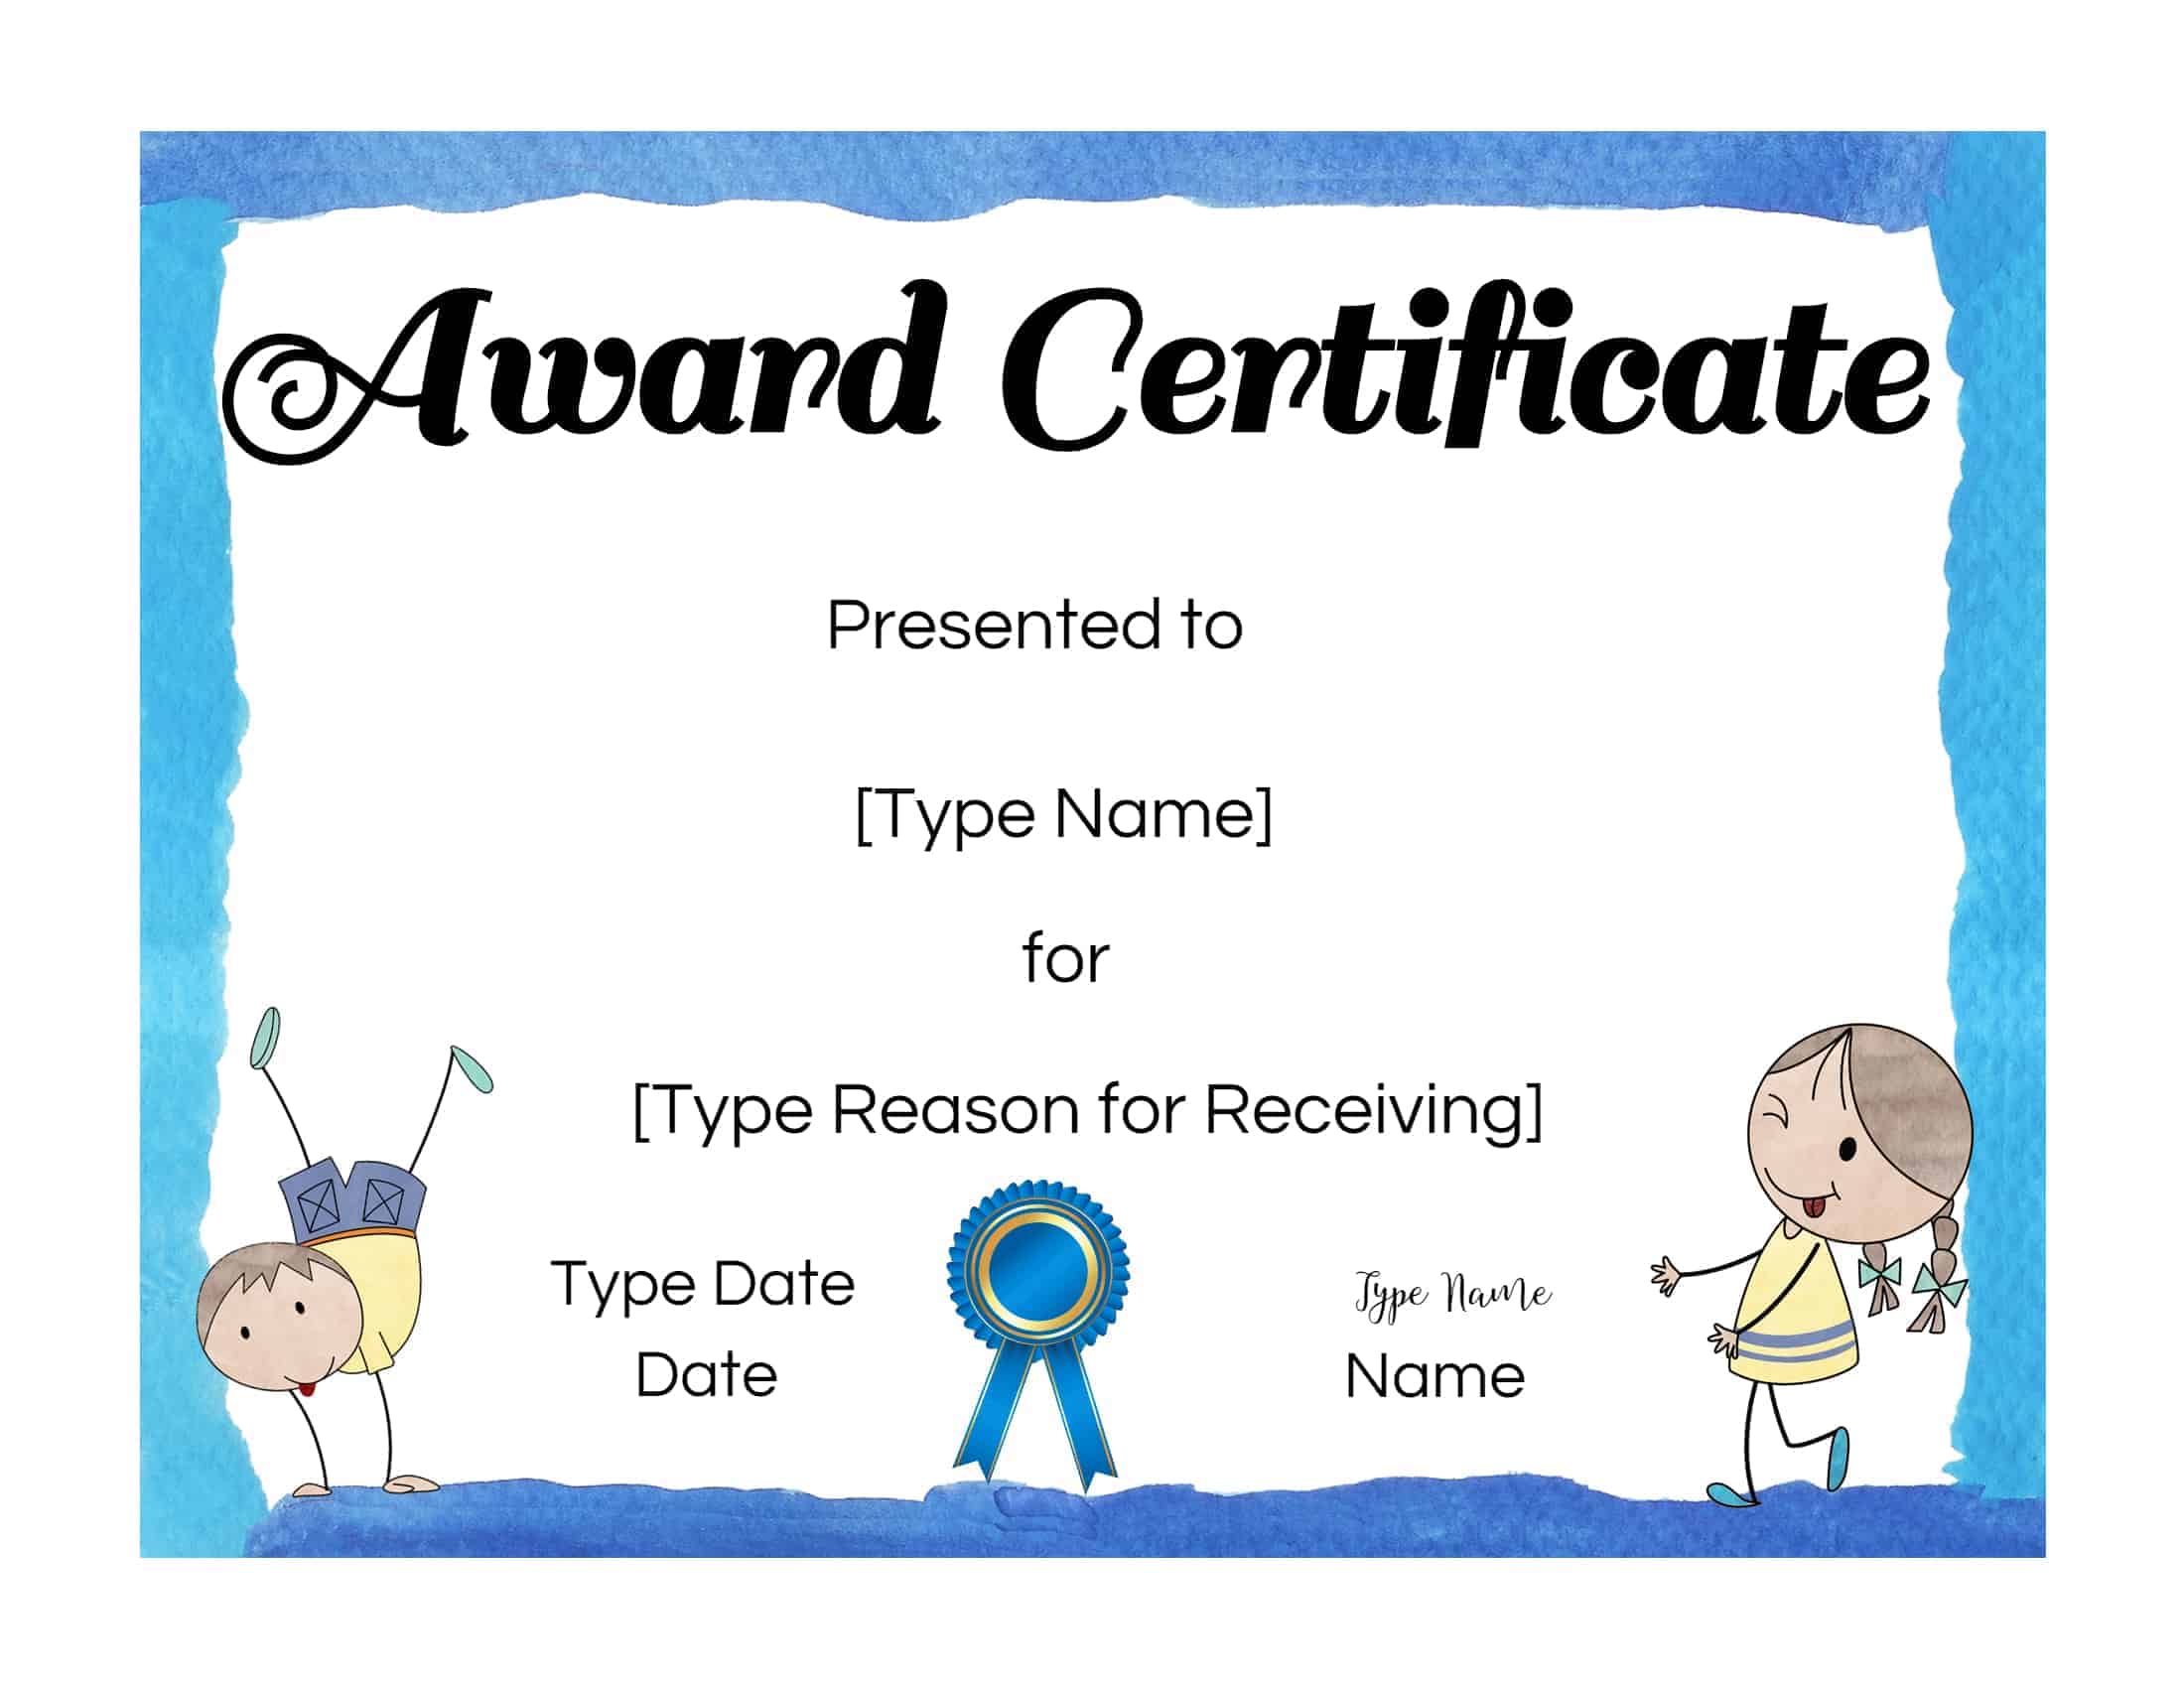 Printable And Fillable Award Certificates